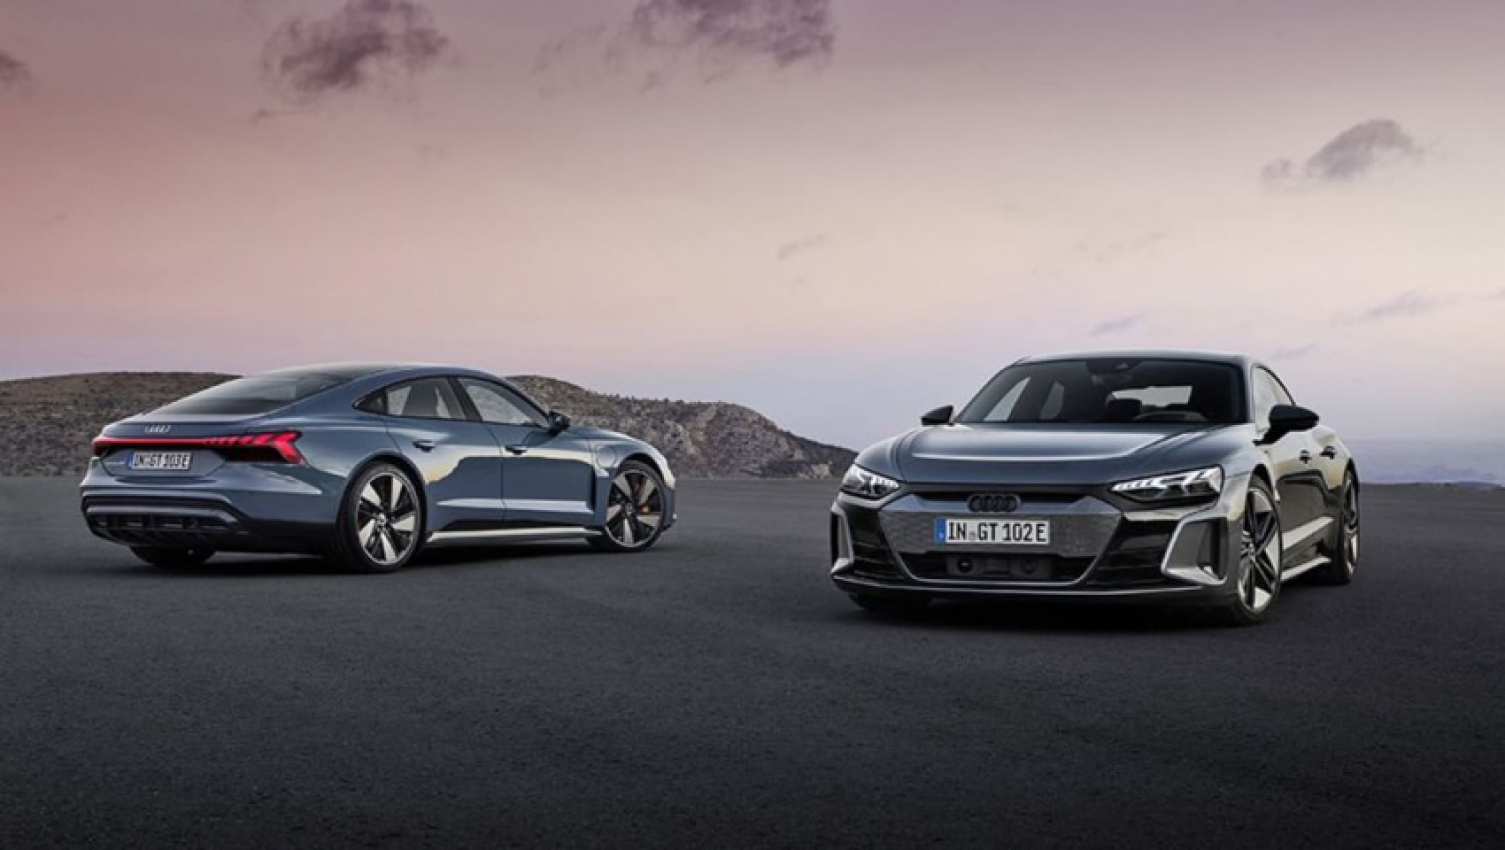 audi, autos, cars, porsche, tesla, audi e-tron, audi e-tron gt, audi e-tron gt 2022, audi news, audi sedan range, electric, electric cars, green cars, porsche taycan, prestige & luxury cars, tesla model s, android, 2022 audi e-tron gt pricing and features: high performance electric audi flagship takes fight to tesla model s plaid and porsche taycan